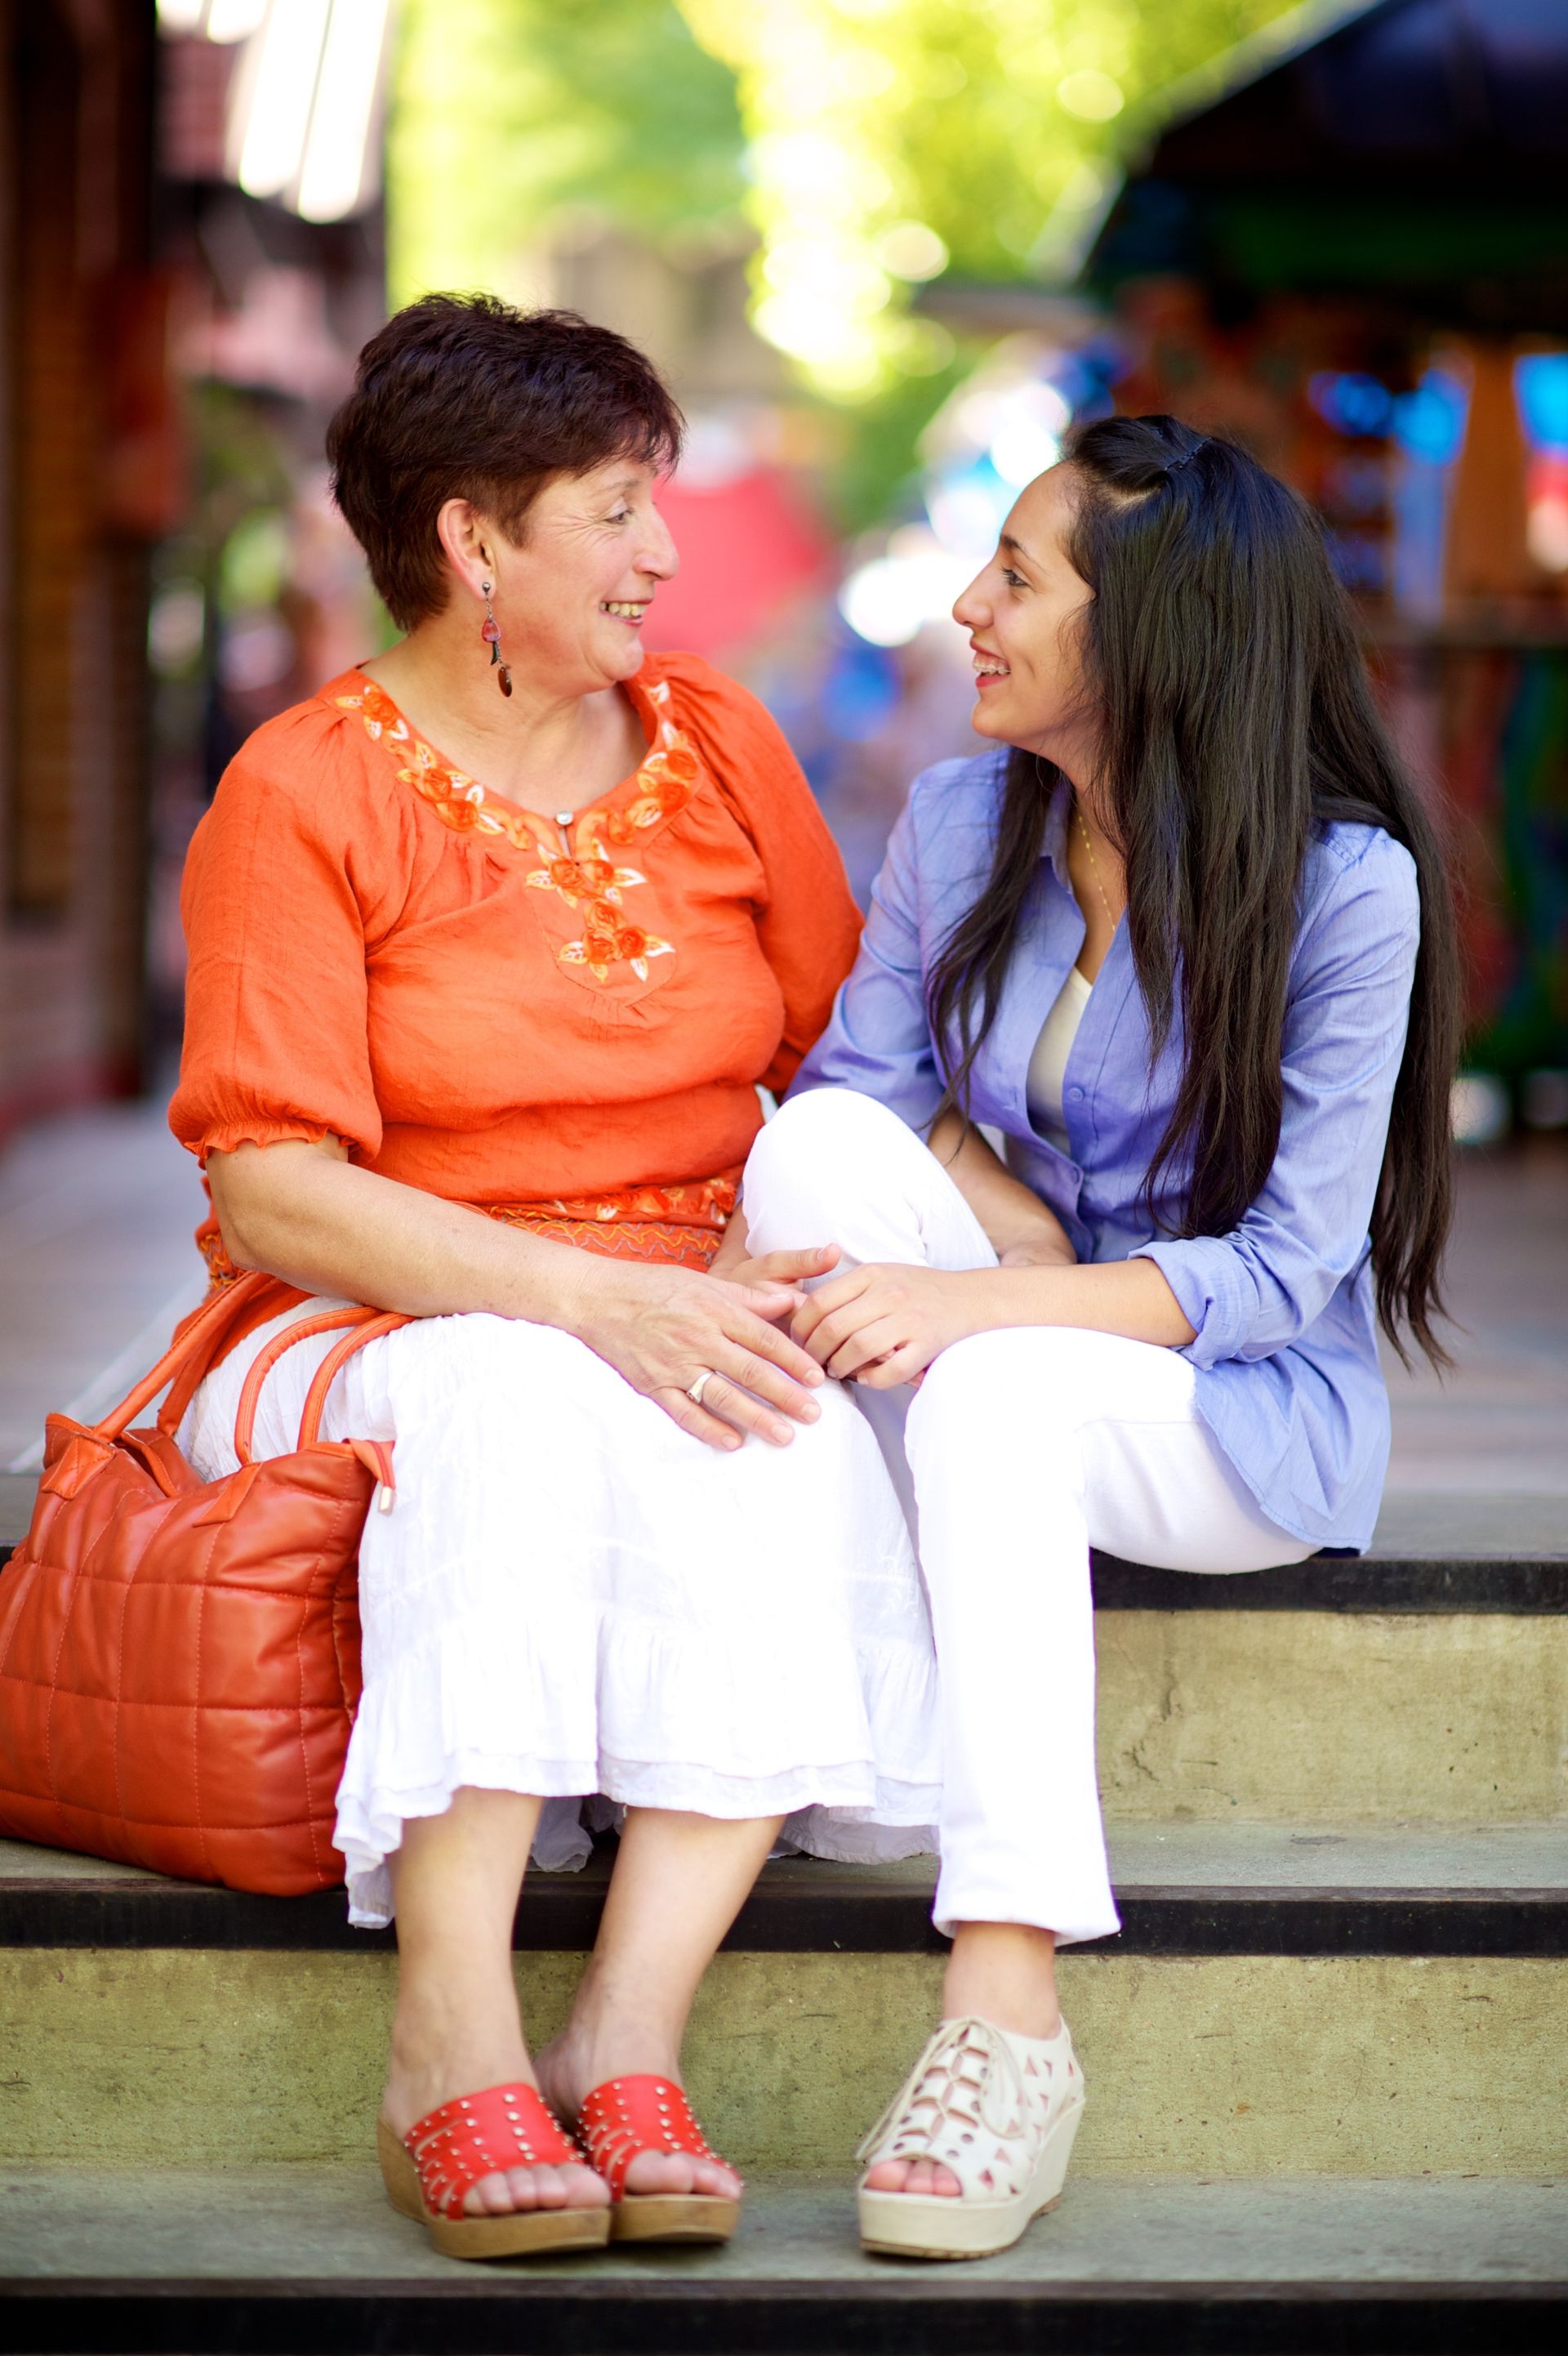 A mother and daughter from Argentina talking together.  